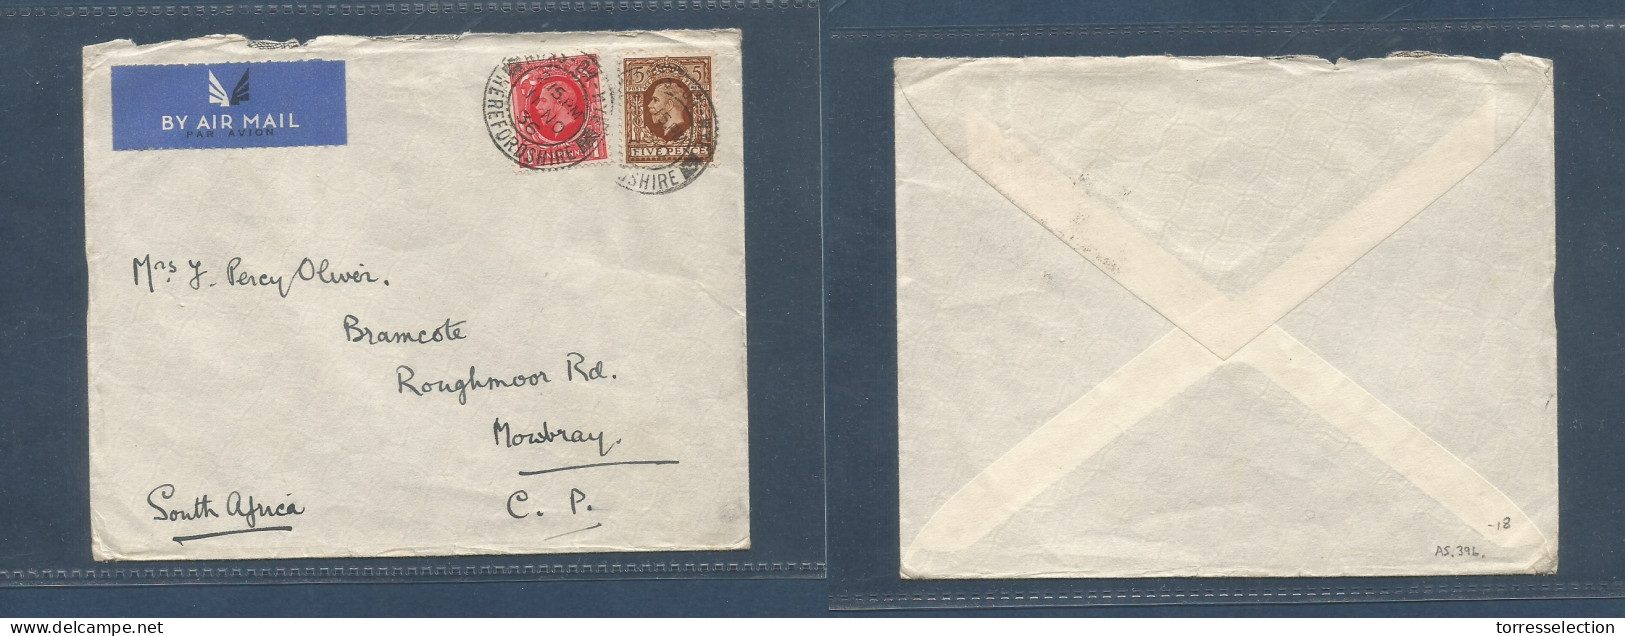 Great Britain - XX. 1936 (11 Nov) Herefordshire - South Africa, Mowbray. 6d Rate Air Imperial Fkd Envelope AS396. XSALE. - ...-1840 Precursori